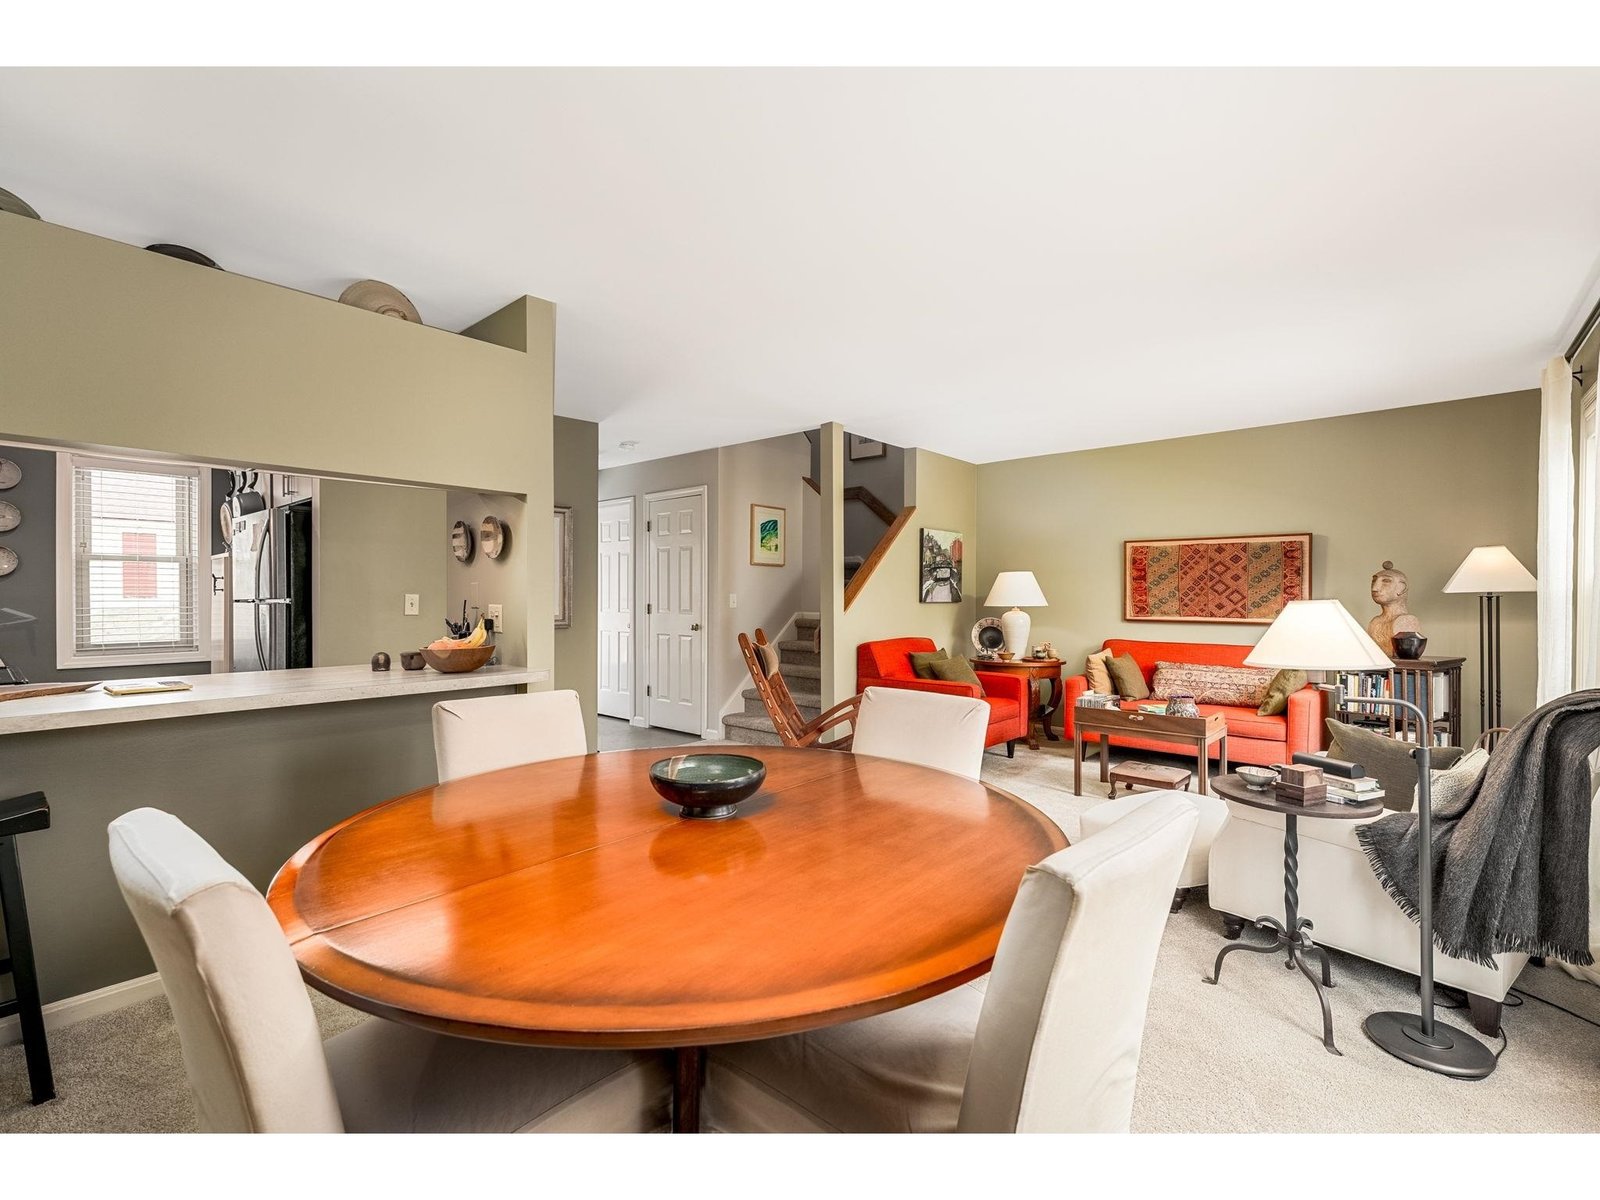 Exquisite condo- meticulously maintained